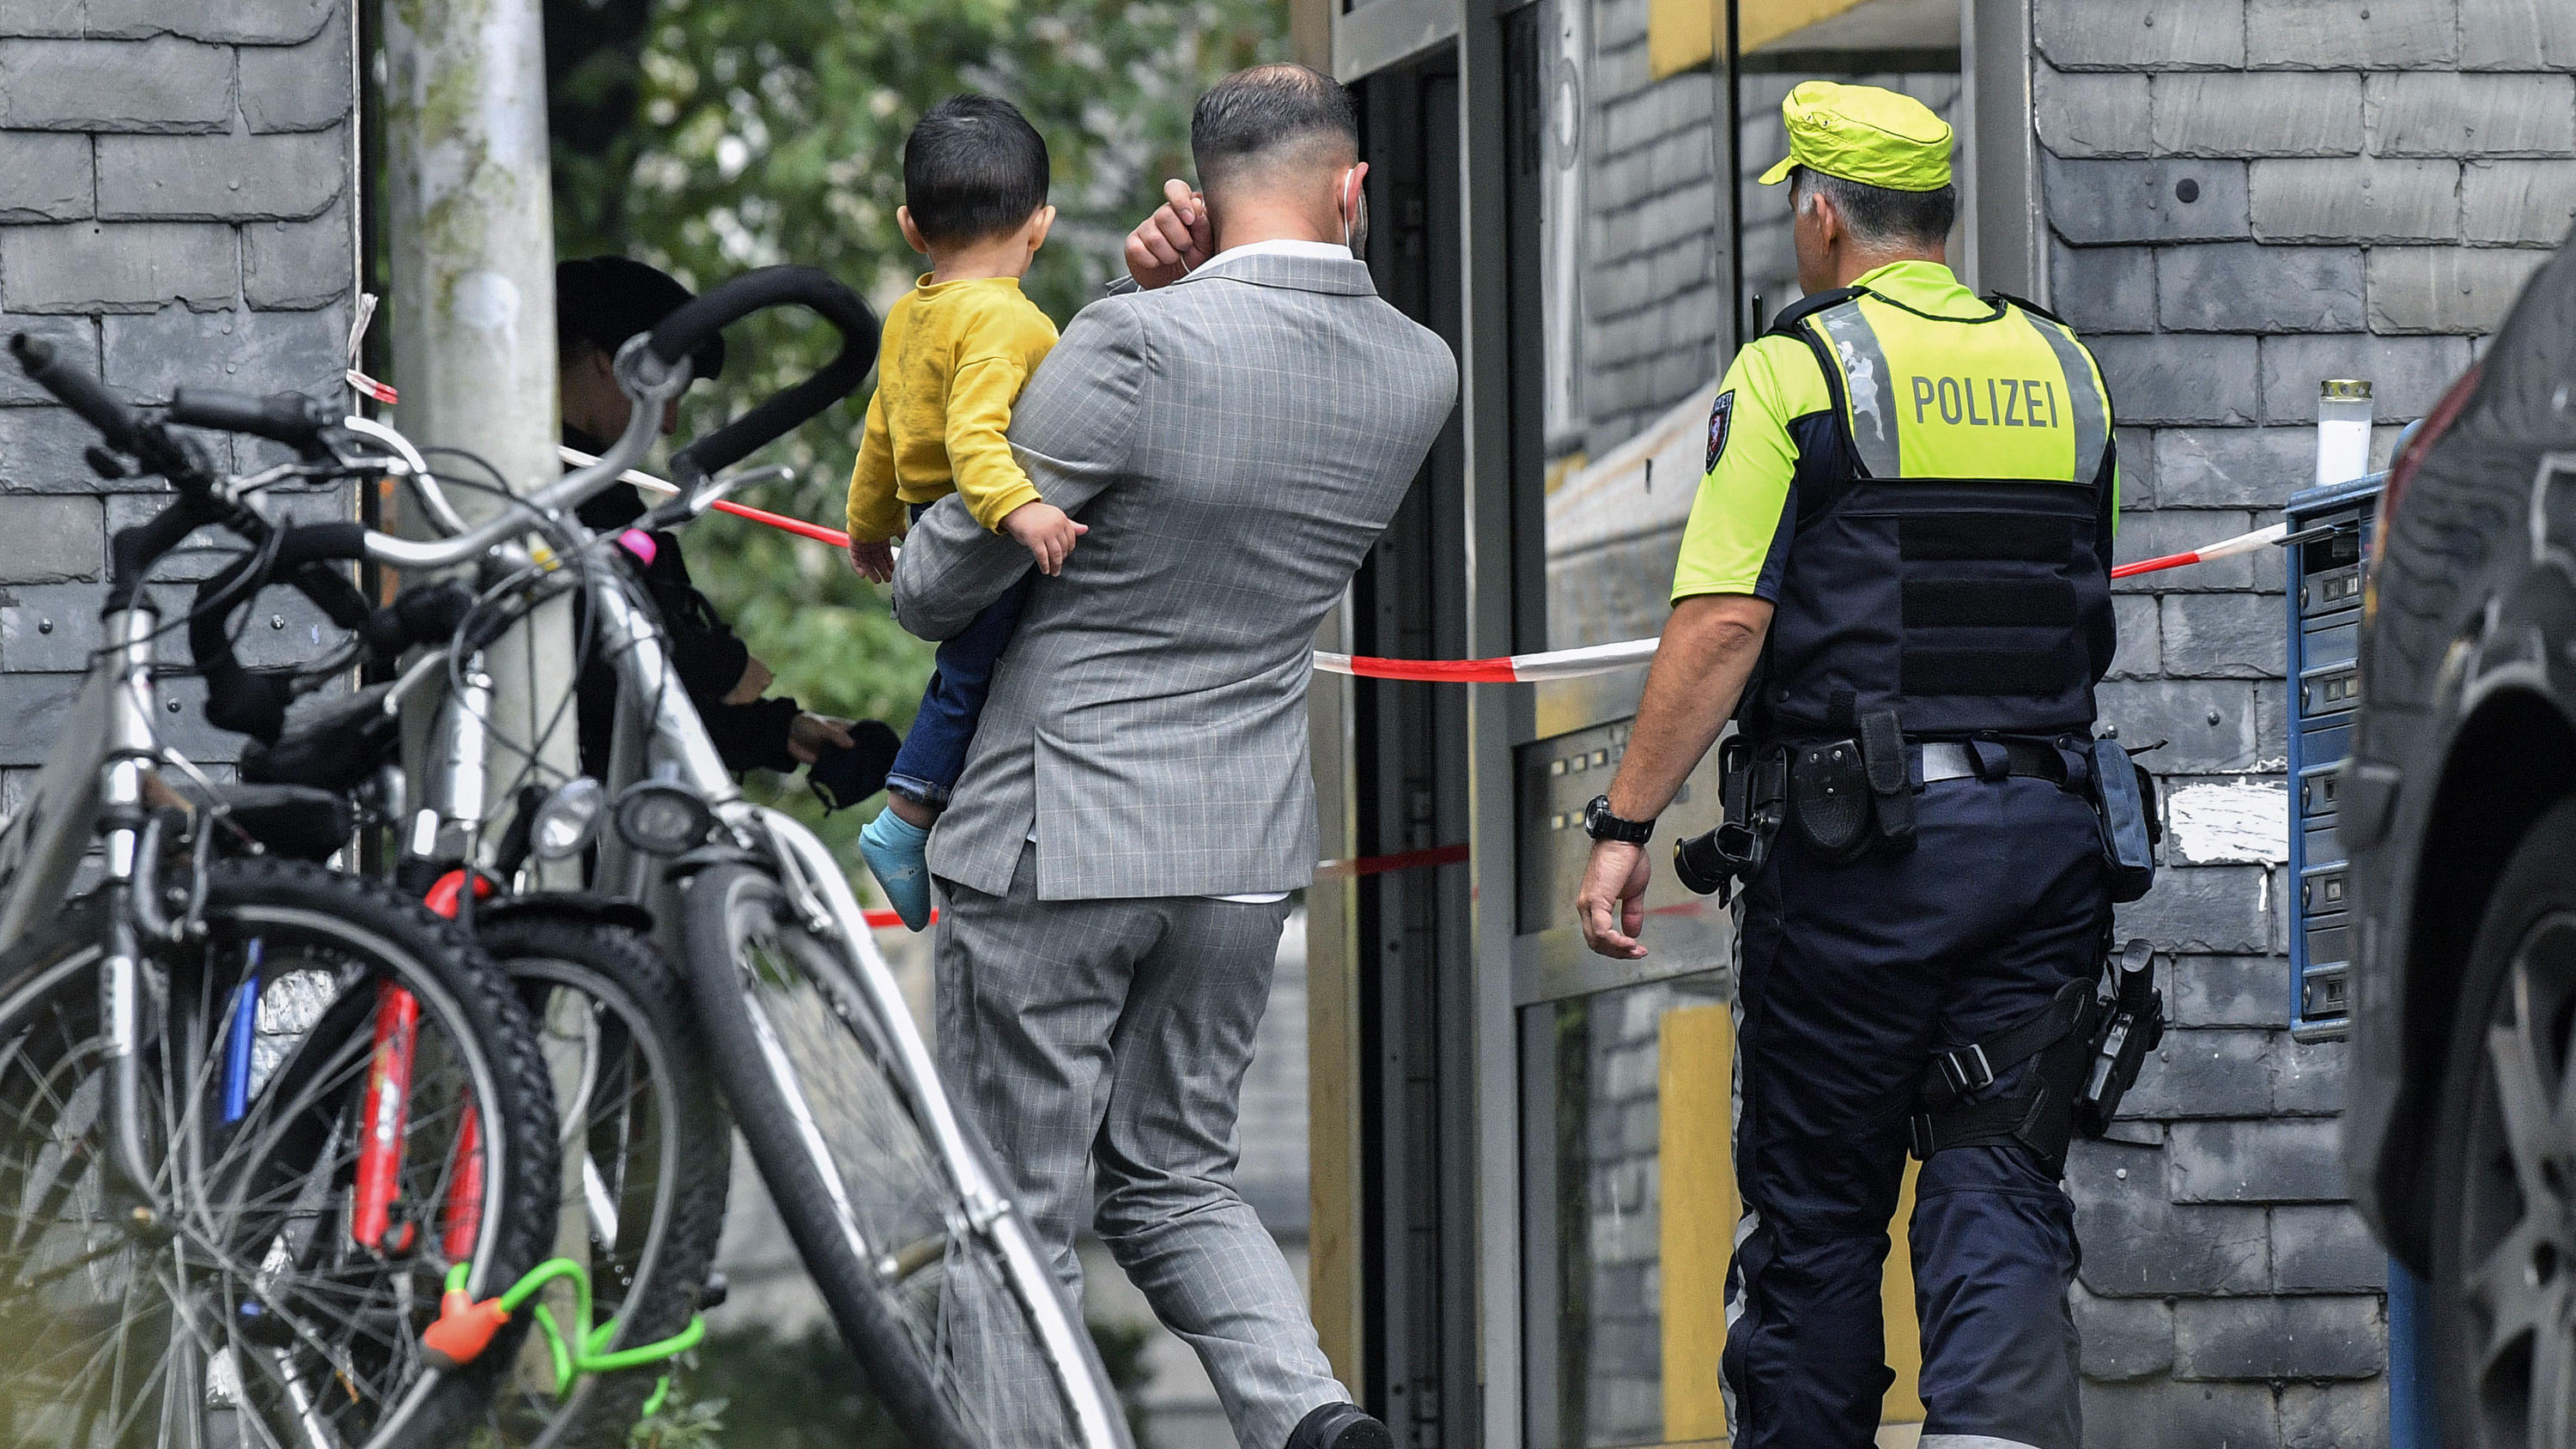 Residents enter a house with a police officer, where five dead children were found in Solingen, Germany, Thursday, Sept. 3, 2020. Police say the five children have been found dead at an apartment in the western German city, and their mother is suspec